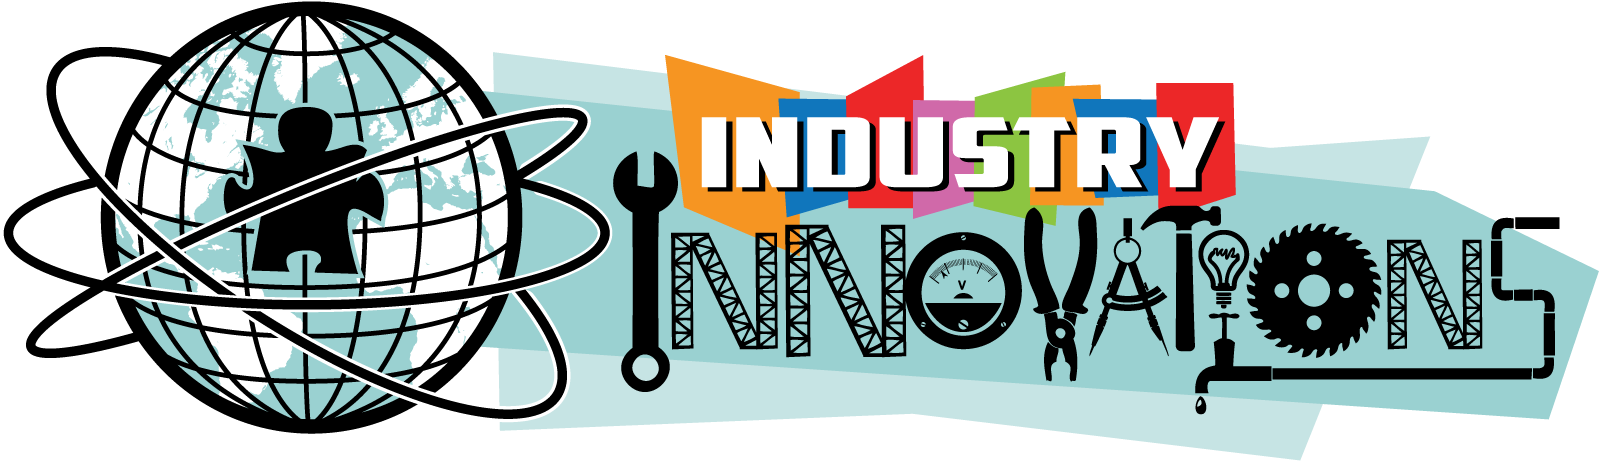 Industry Innovations Logoconcepts 02132017a 02 Adventure - Adventure Game (1650x525)